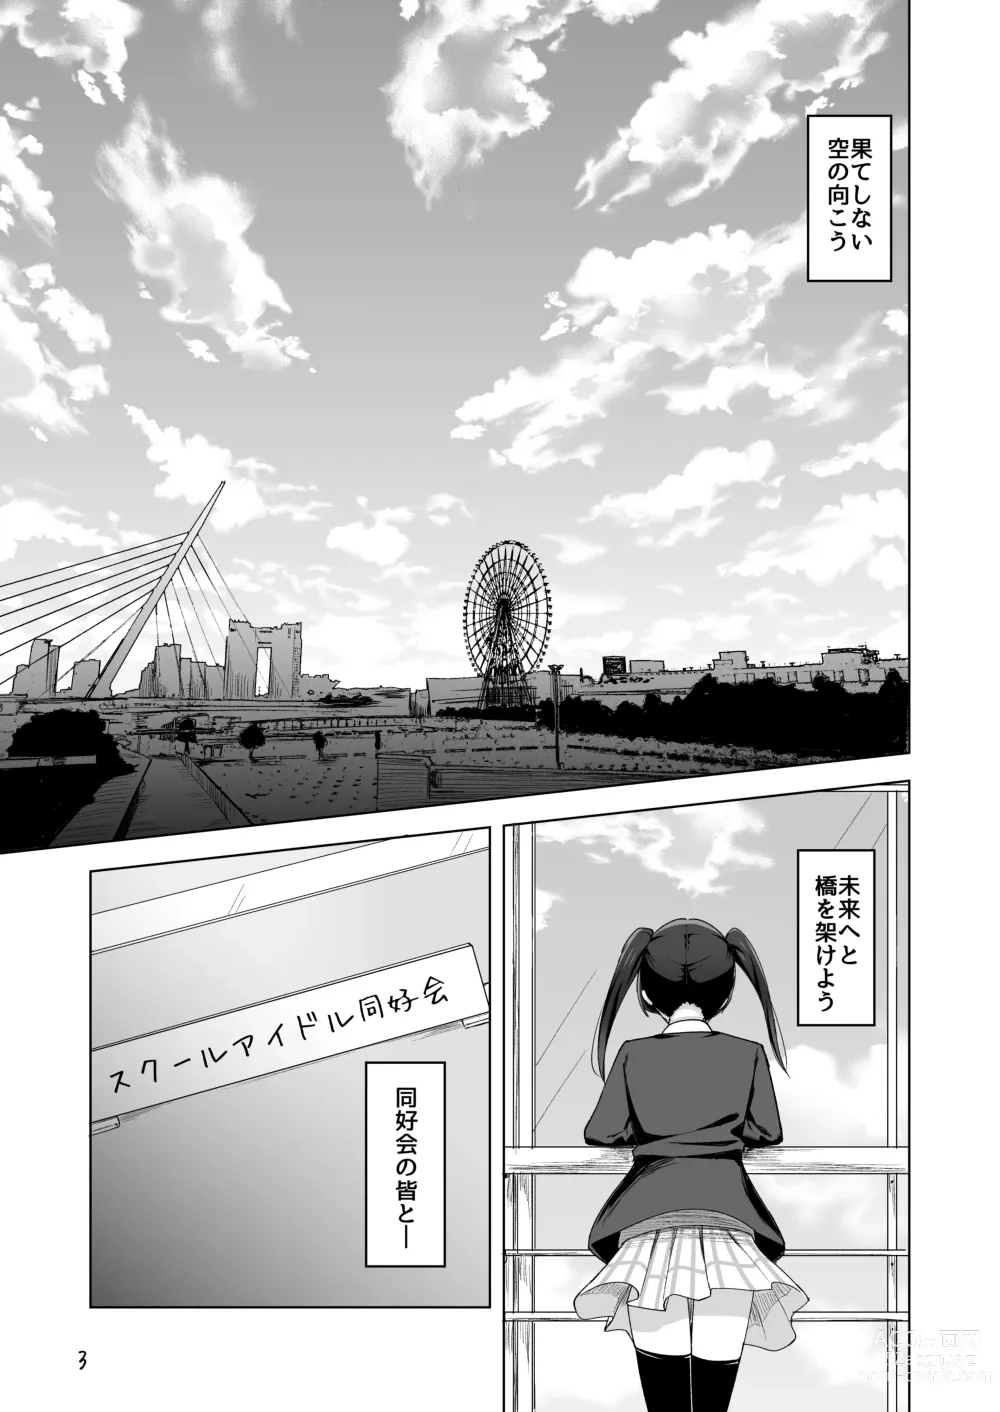 Page 7 of doujinshi Go for dream